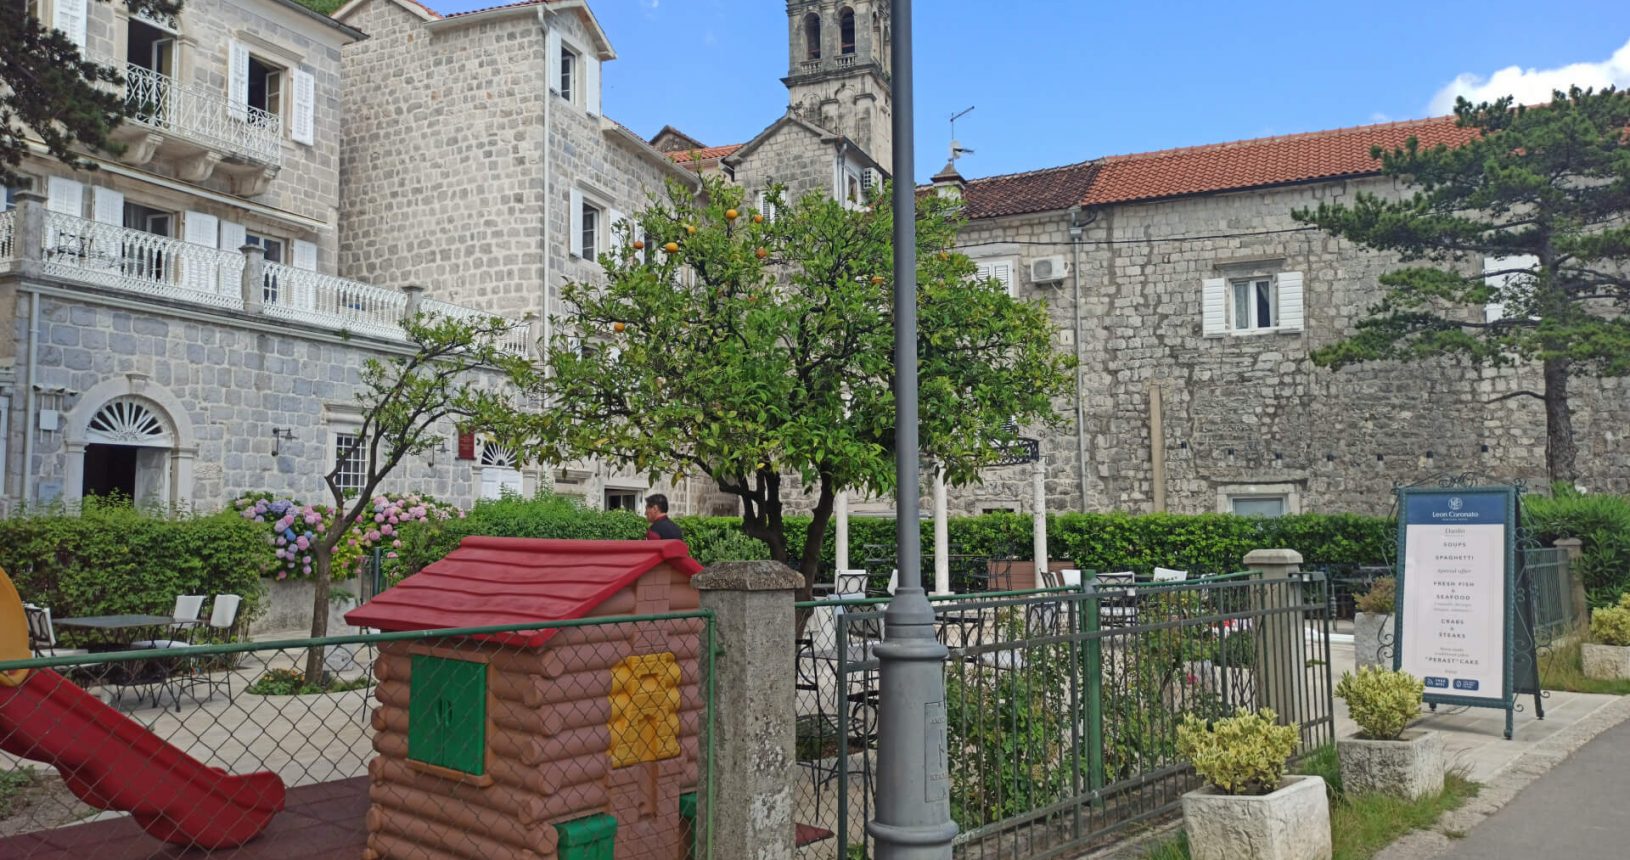 Playground for kids in Perast